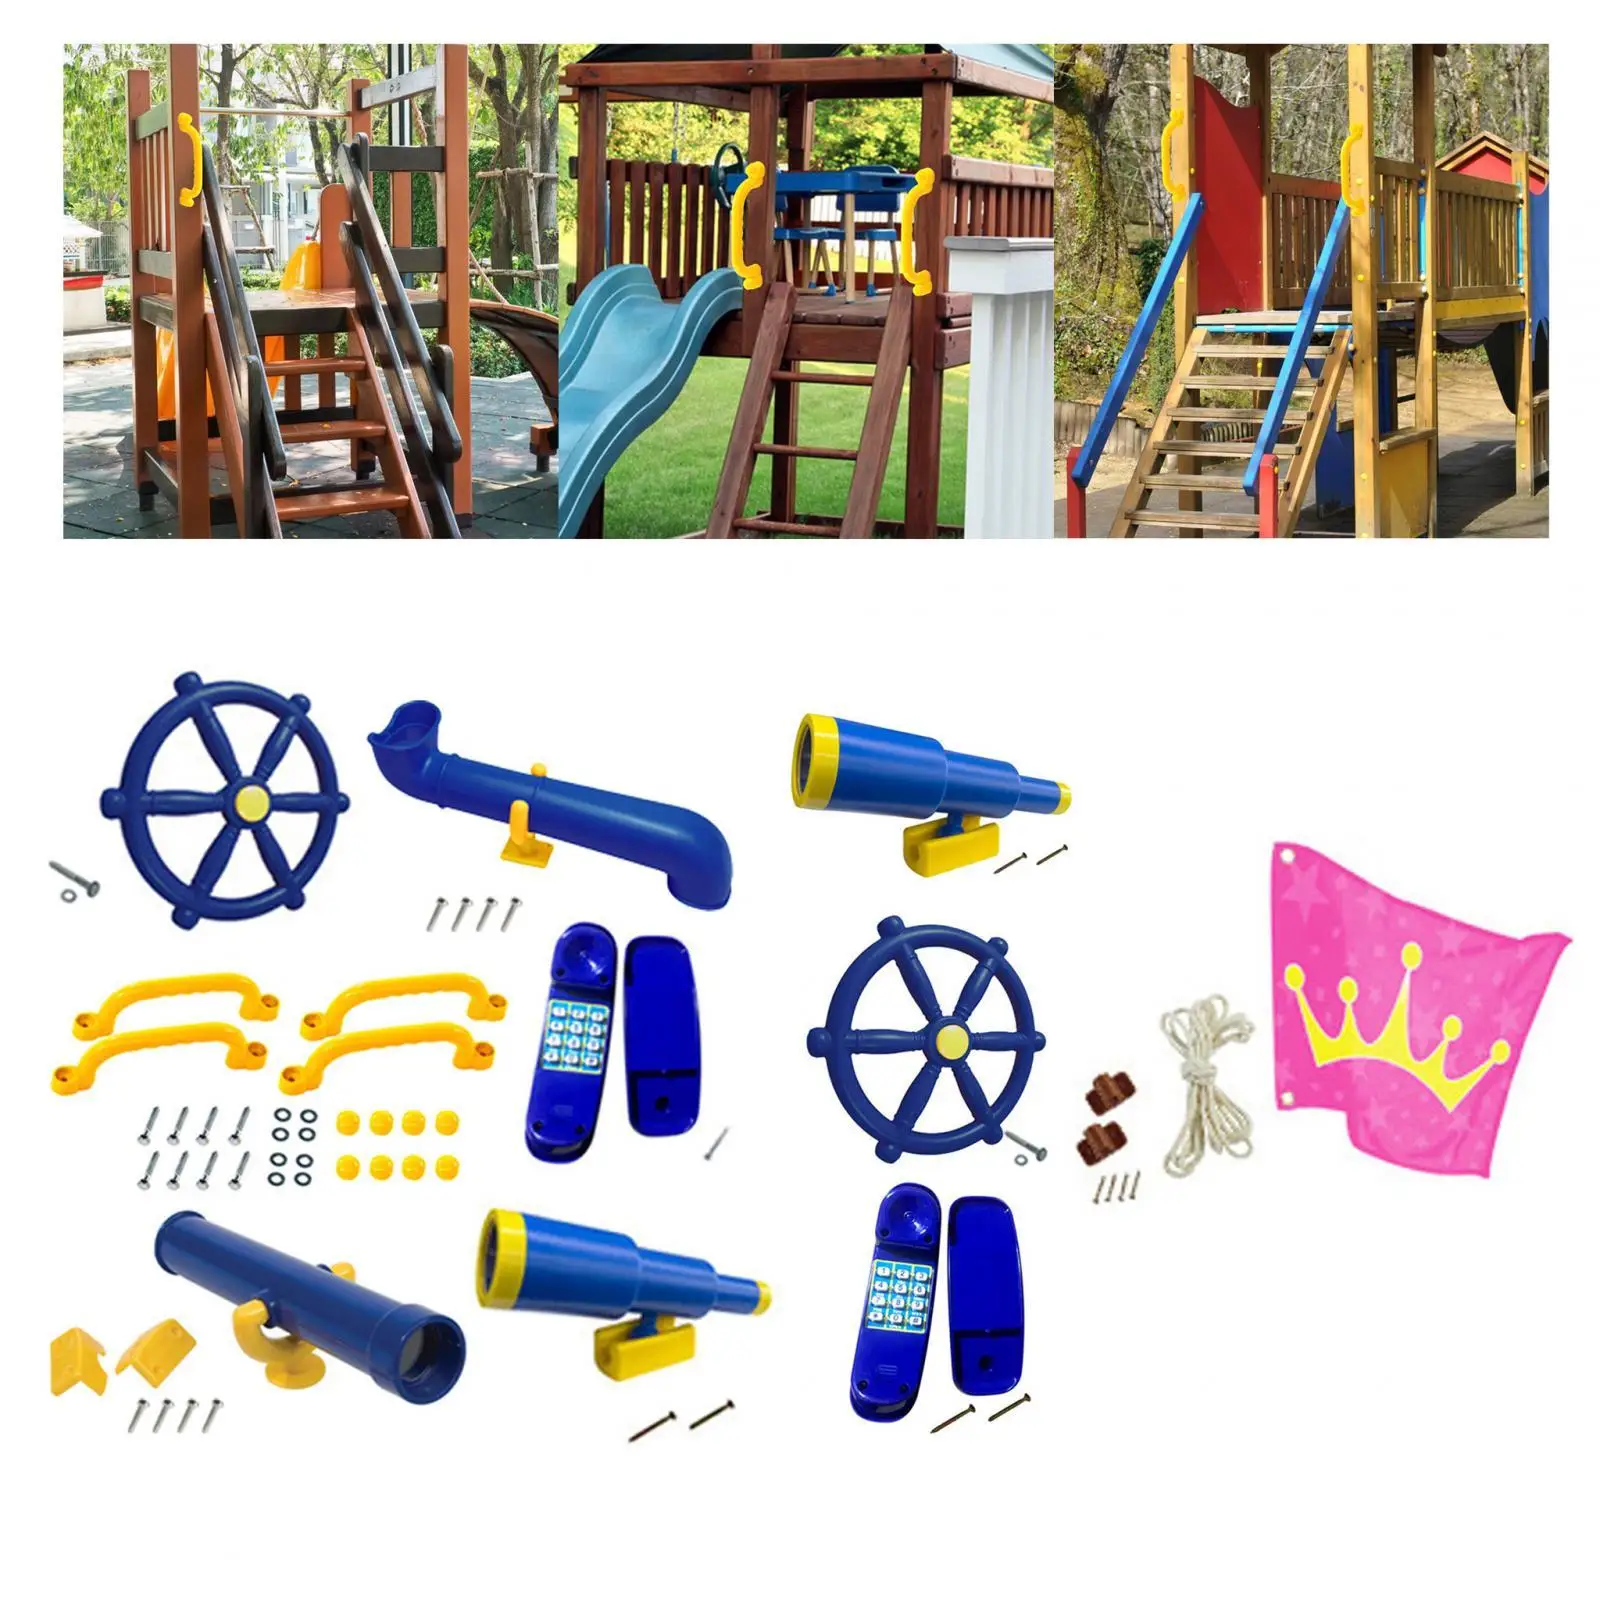 Playground Equipment Pirate Telescope Outdoor Amusement Parts Pirate Ship Parts for Backyard Tree House Jungle Gym Swingset Kids